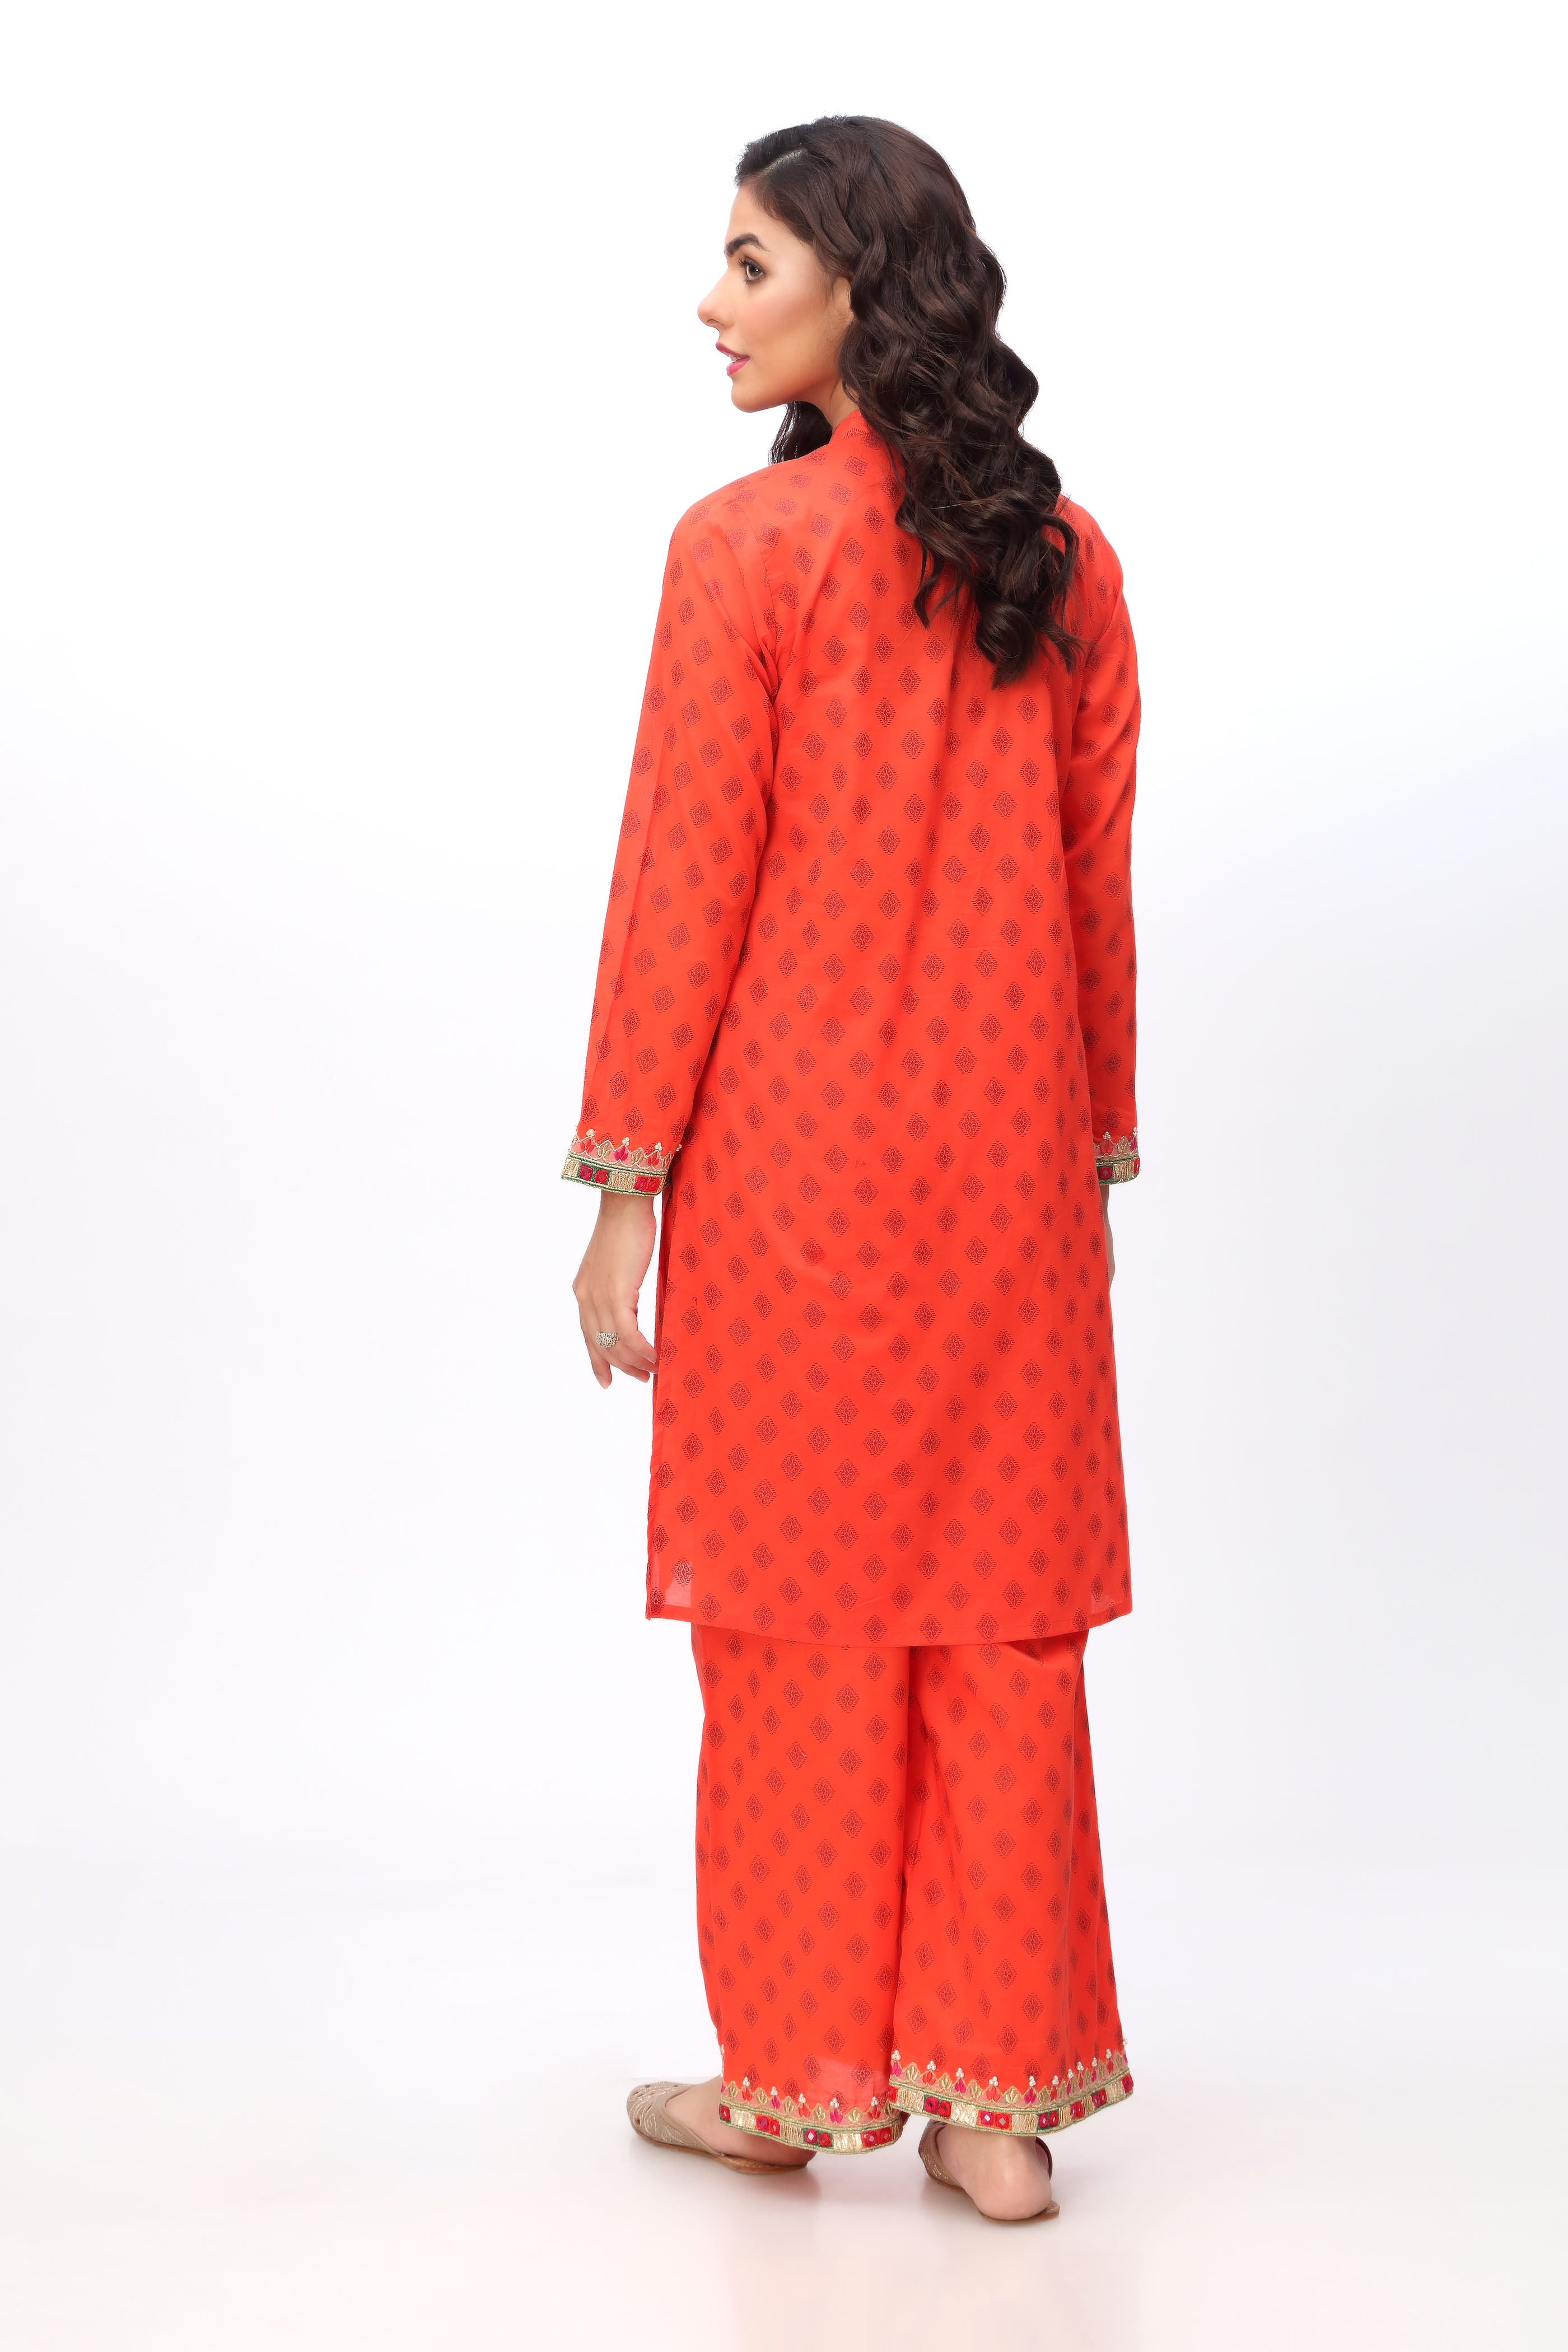 Panni Placket in Orange coloured Printed Lawn fabric 3